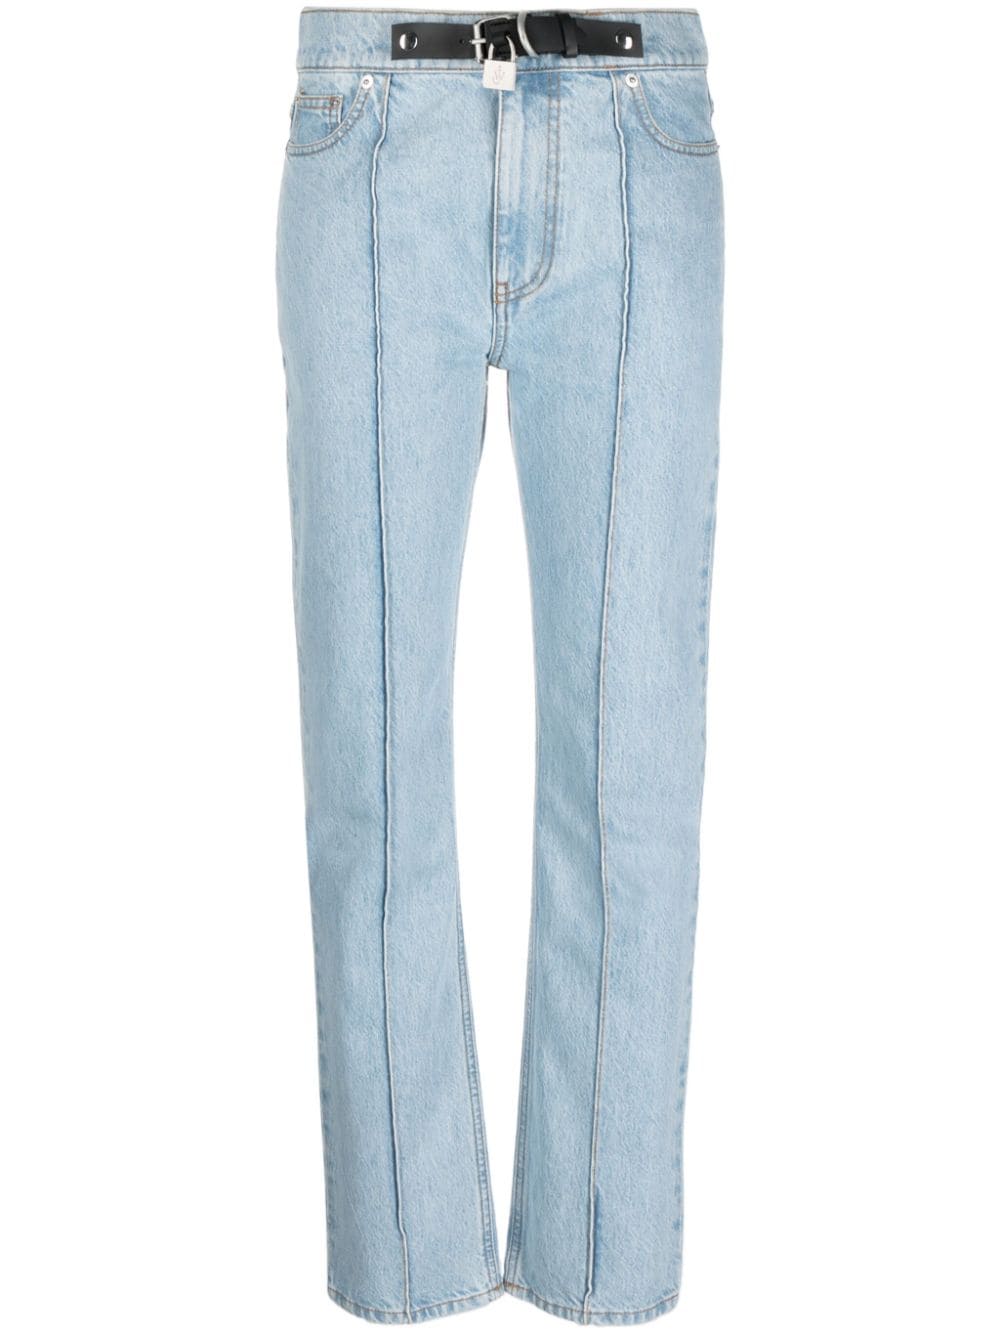 JW ANDERSON PADLOCK-FASTENING TAPERED JEANS